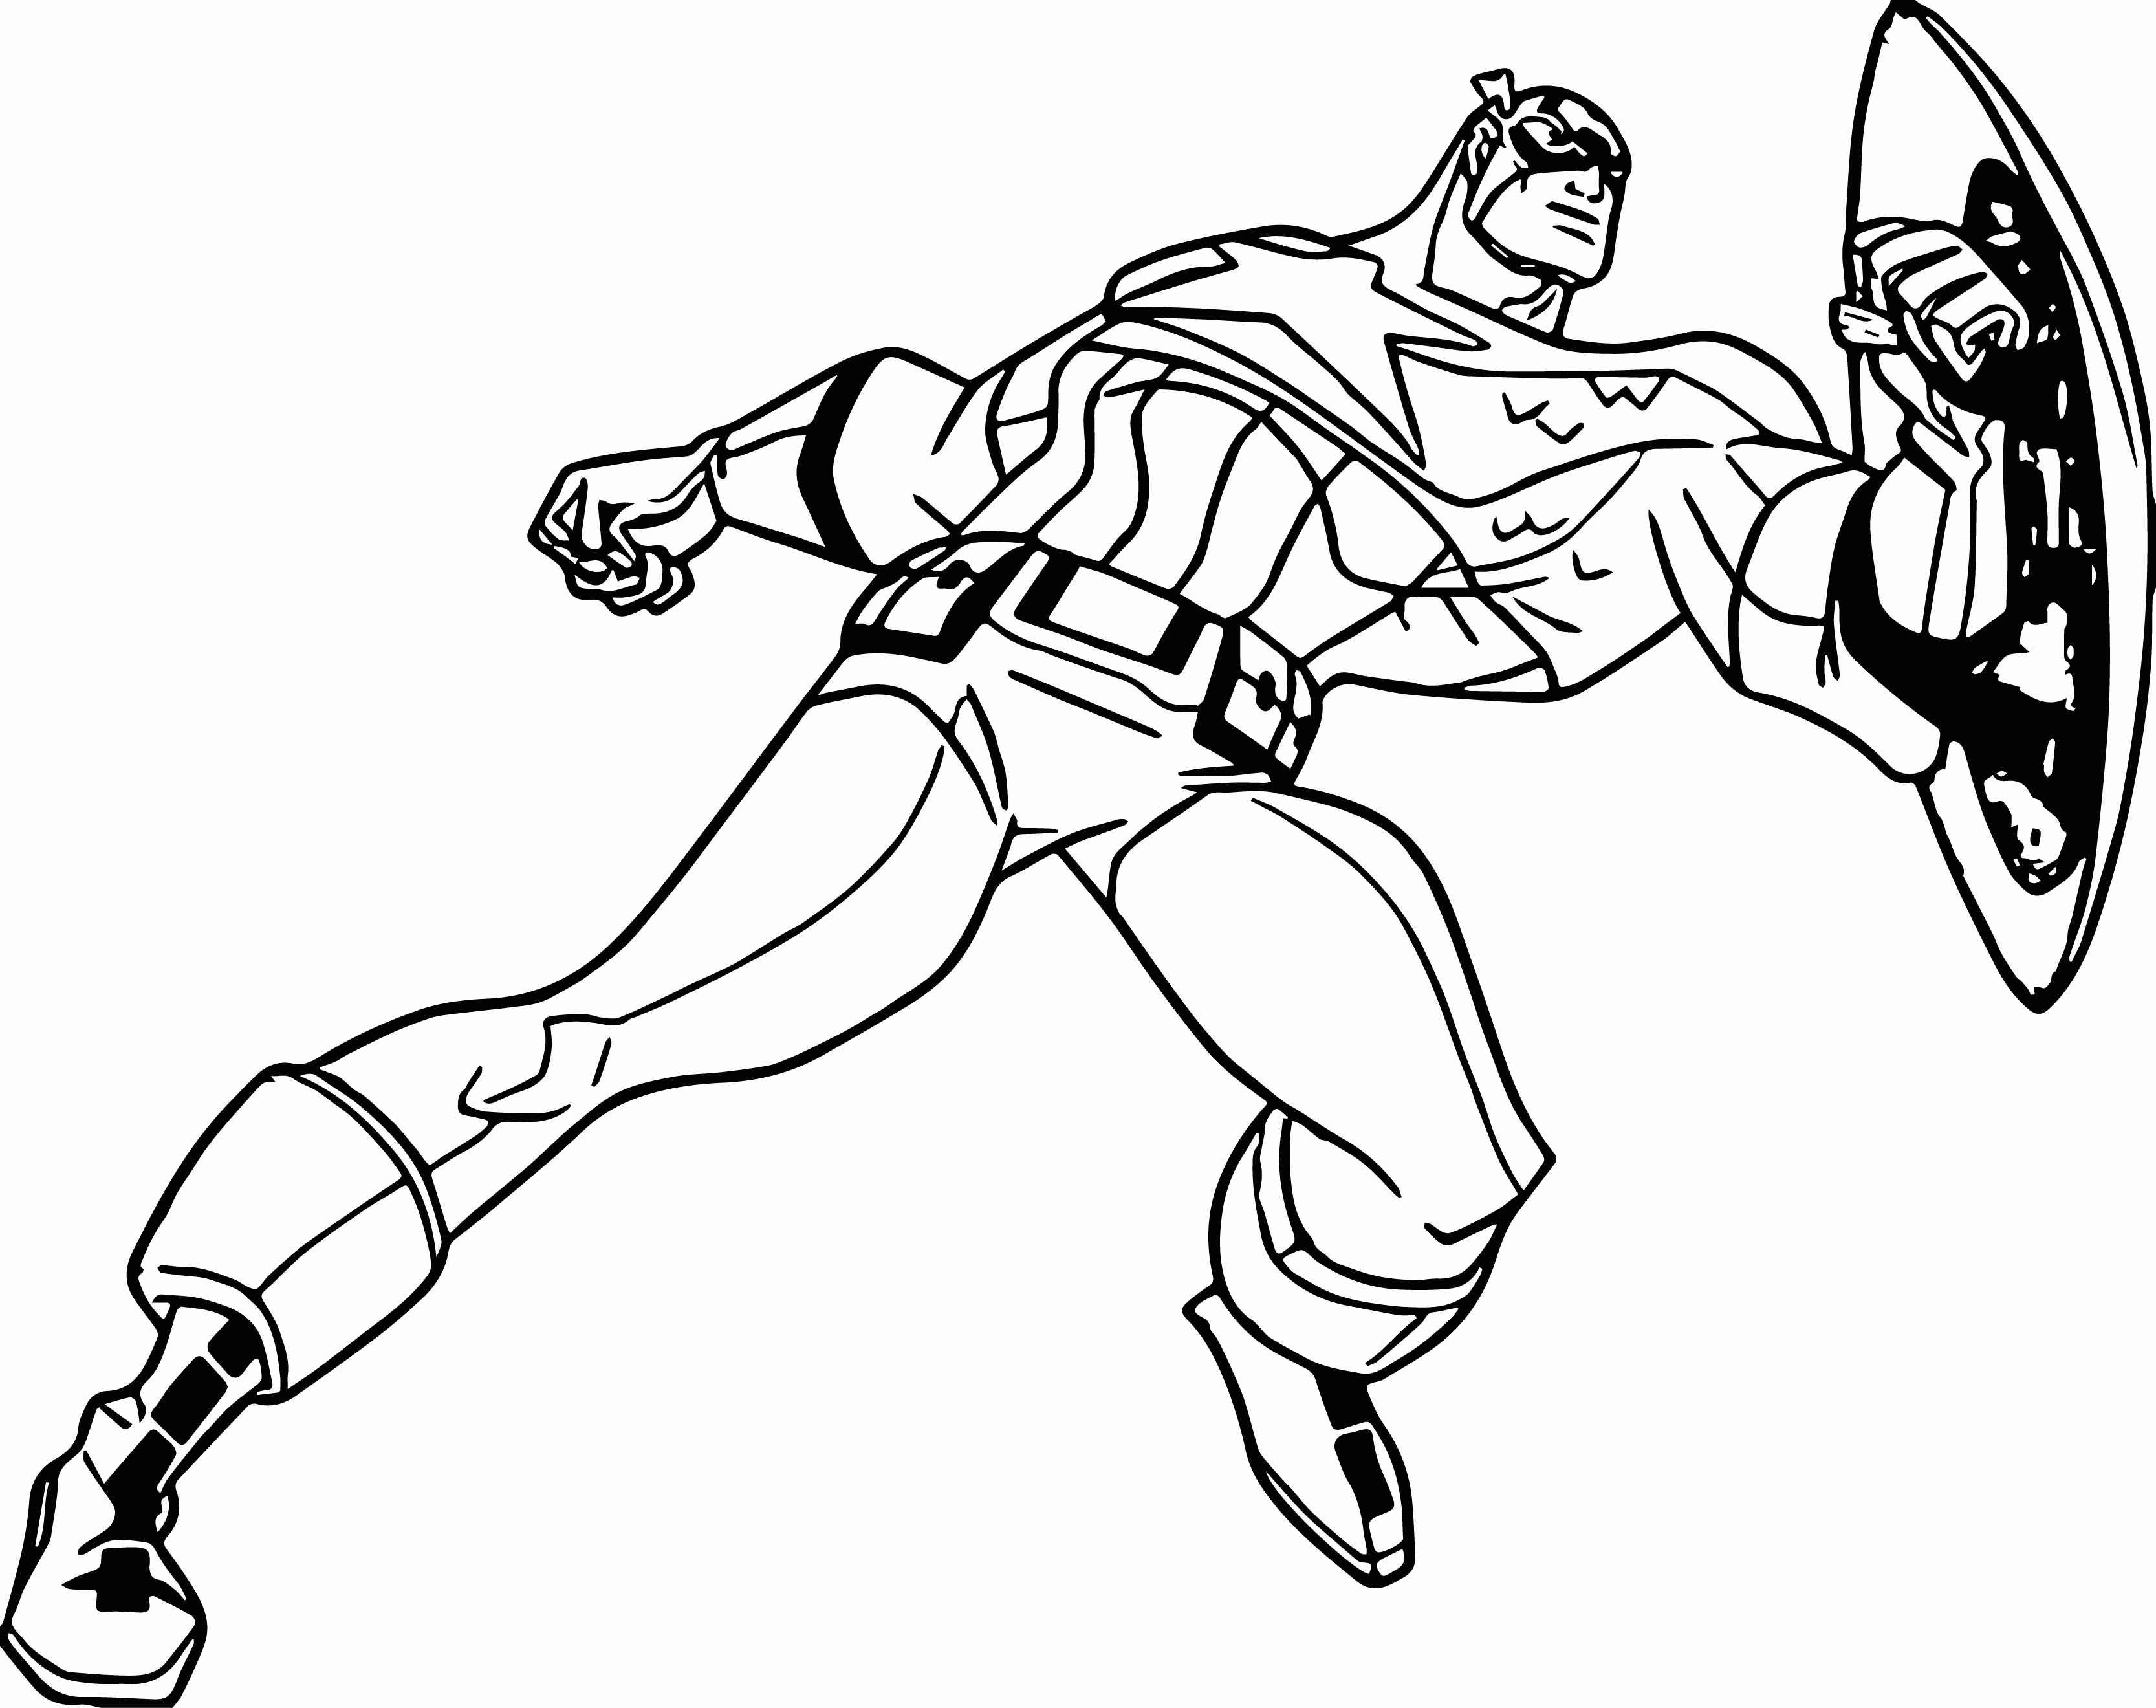 Marvel Captain America Coloring Page | Wecoloringpage